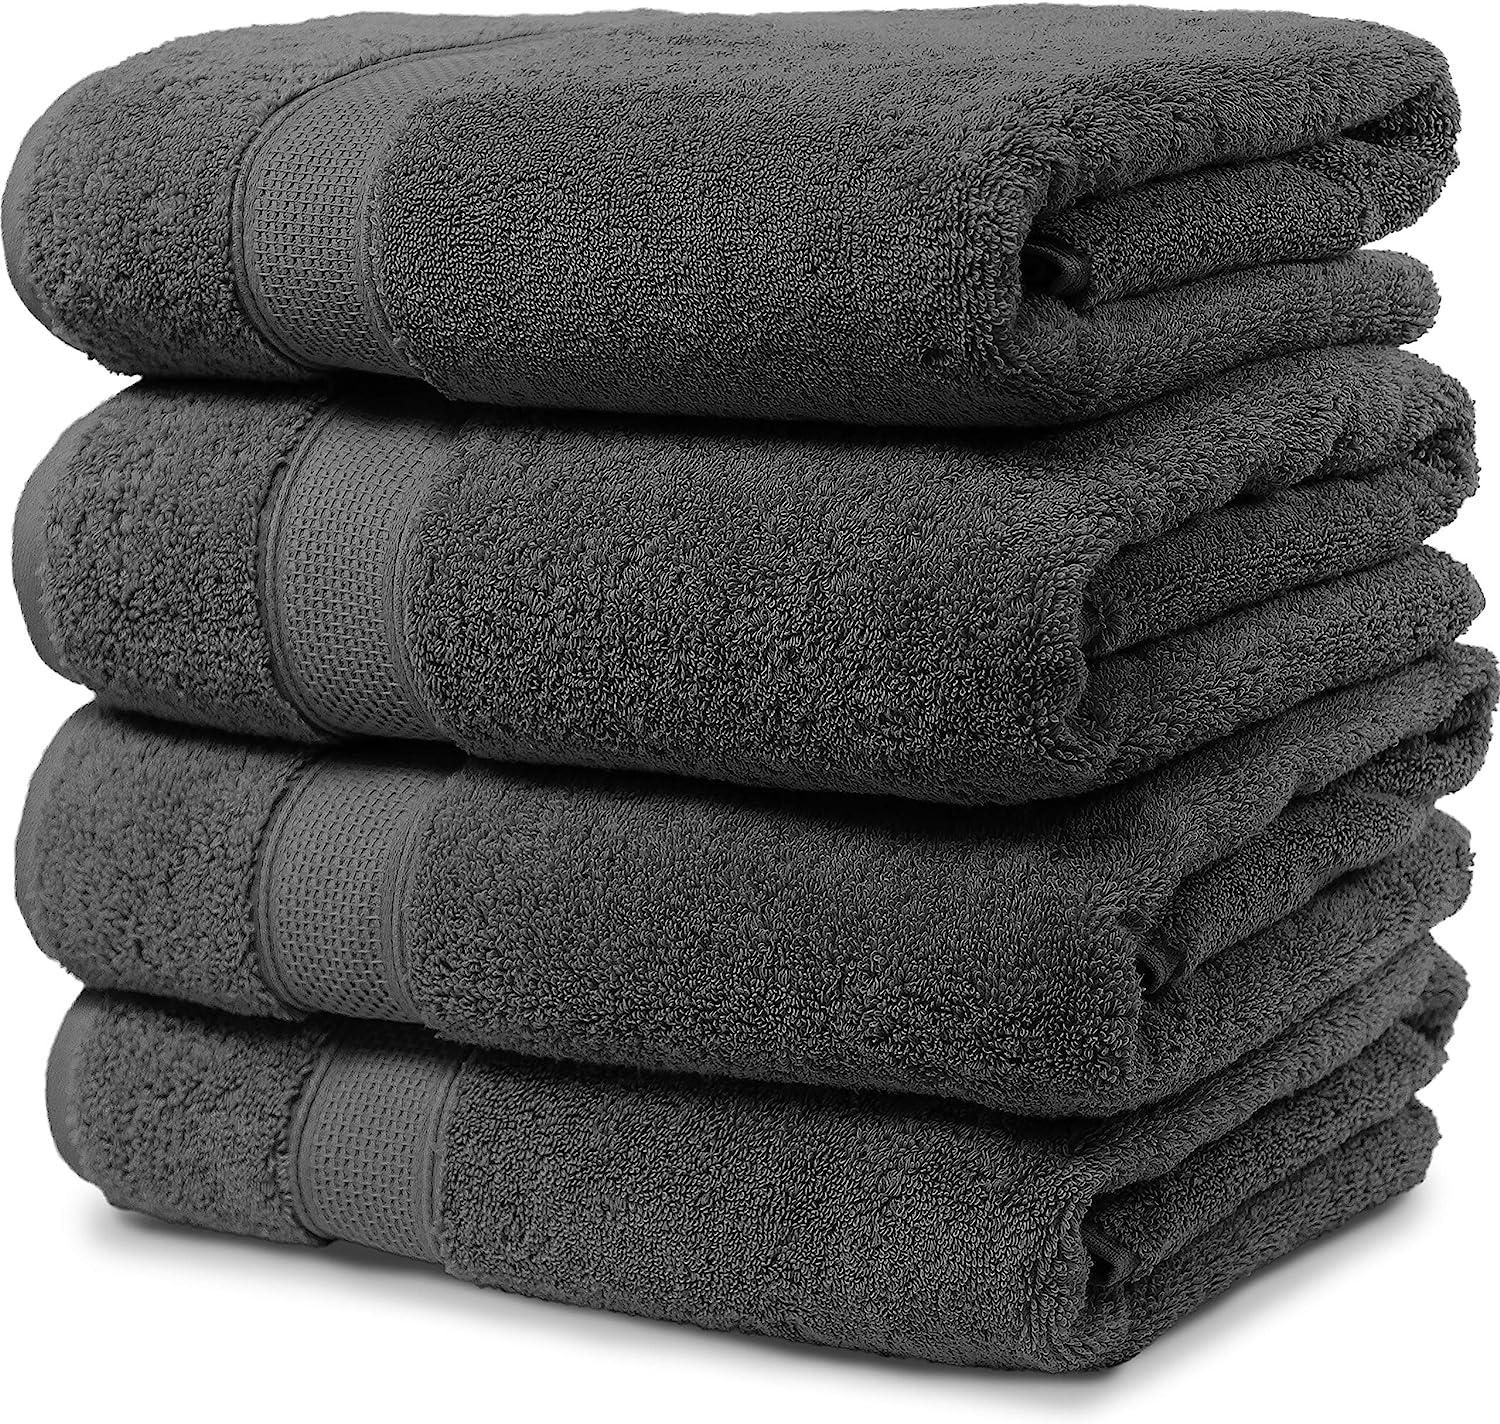 Luxury Turkish Cotton Hand Towel Turkish Cotton Towels for Bathroom, Kitchen Makeup Shower, Spa, Soft and Absorbent Oversized, 16 x 30 inch